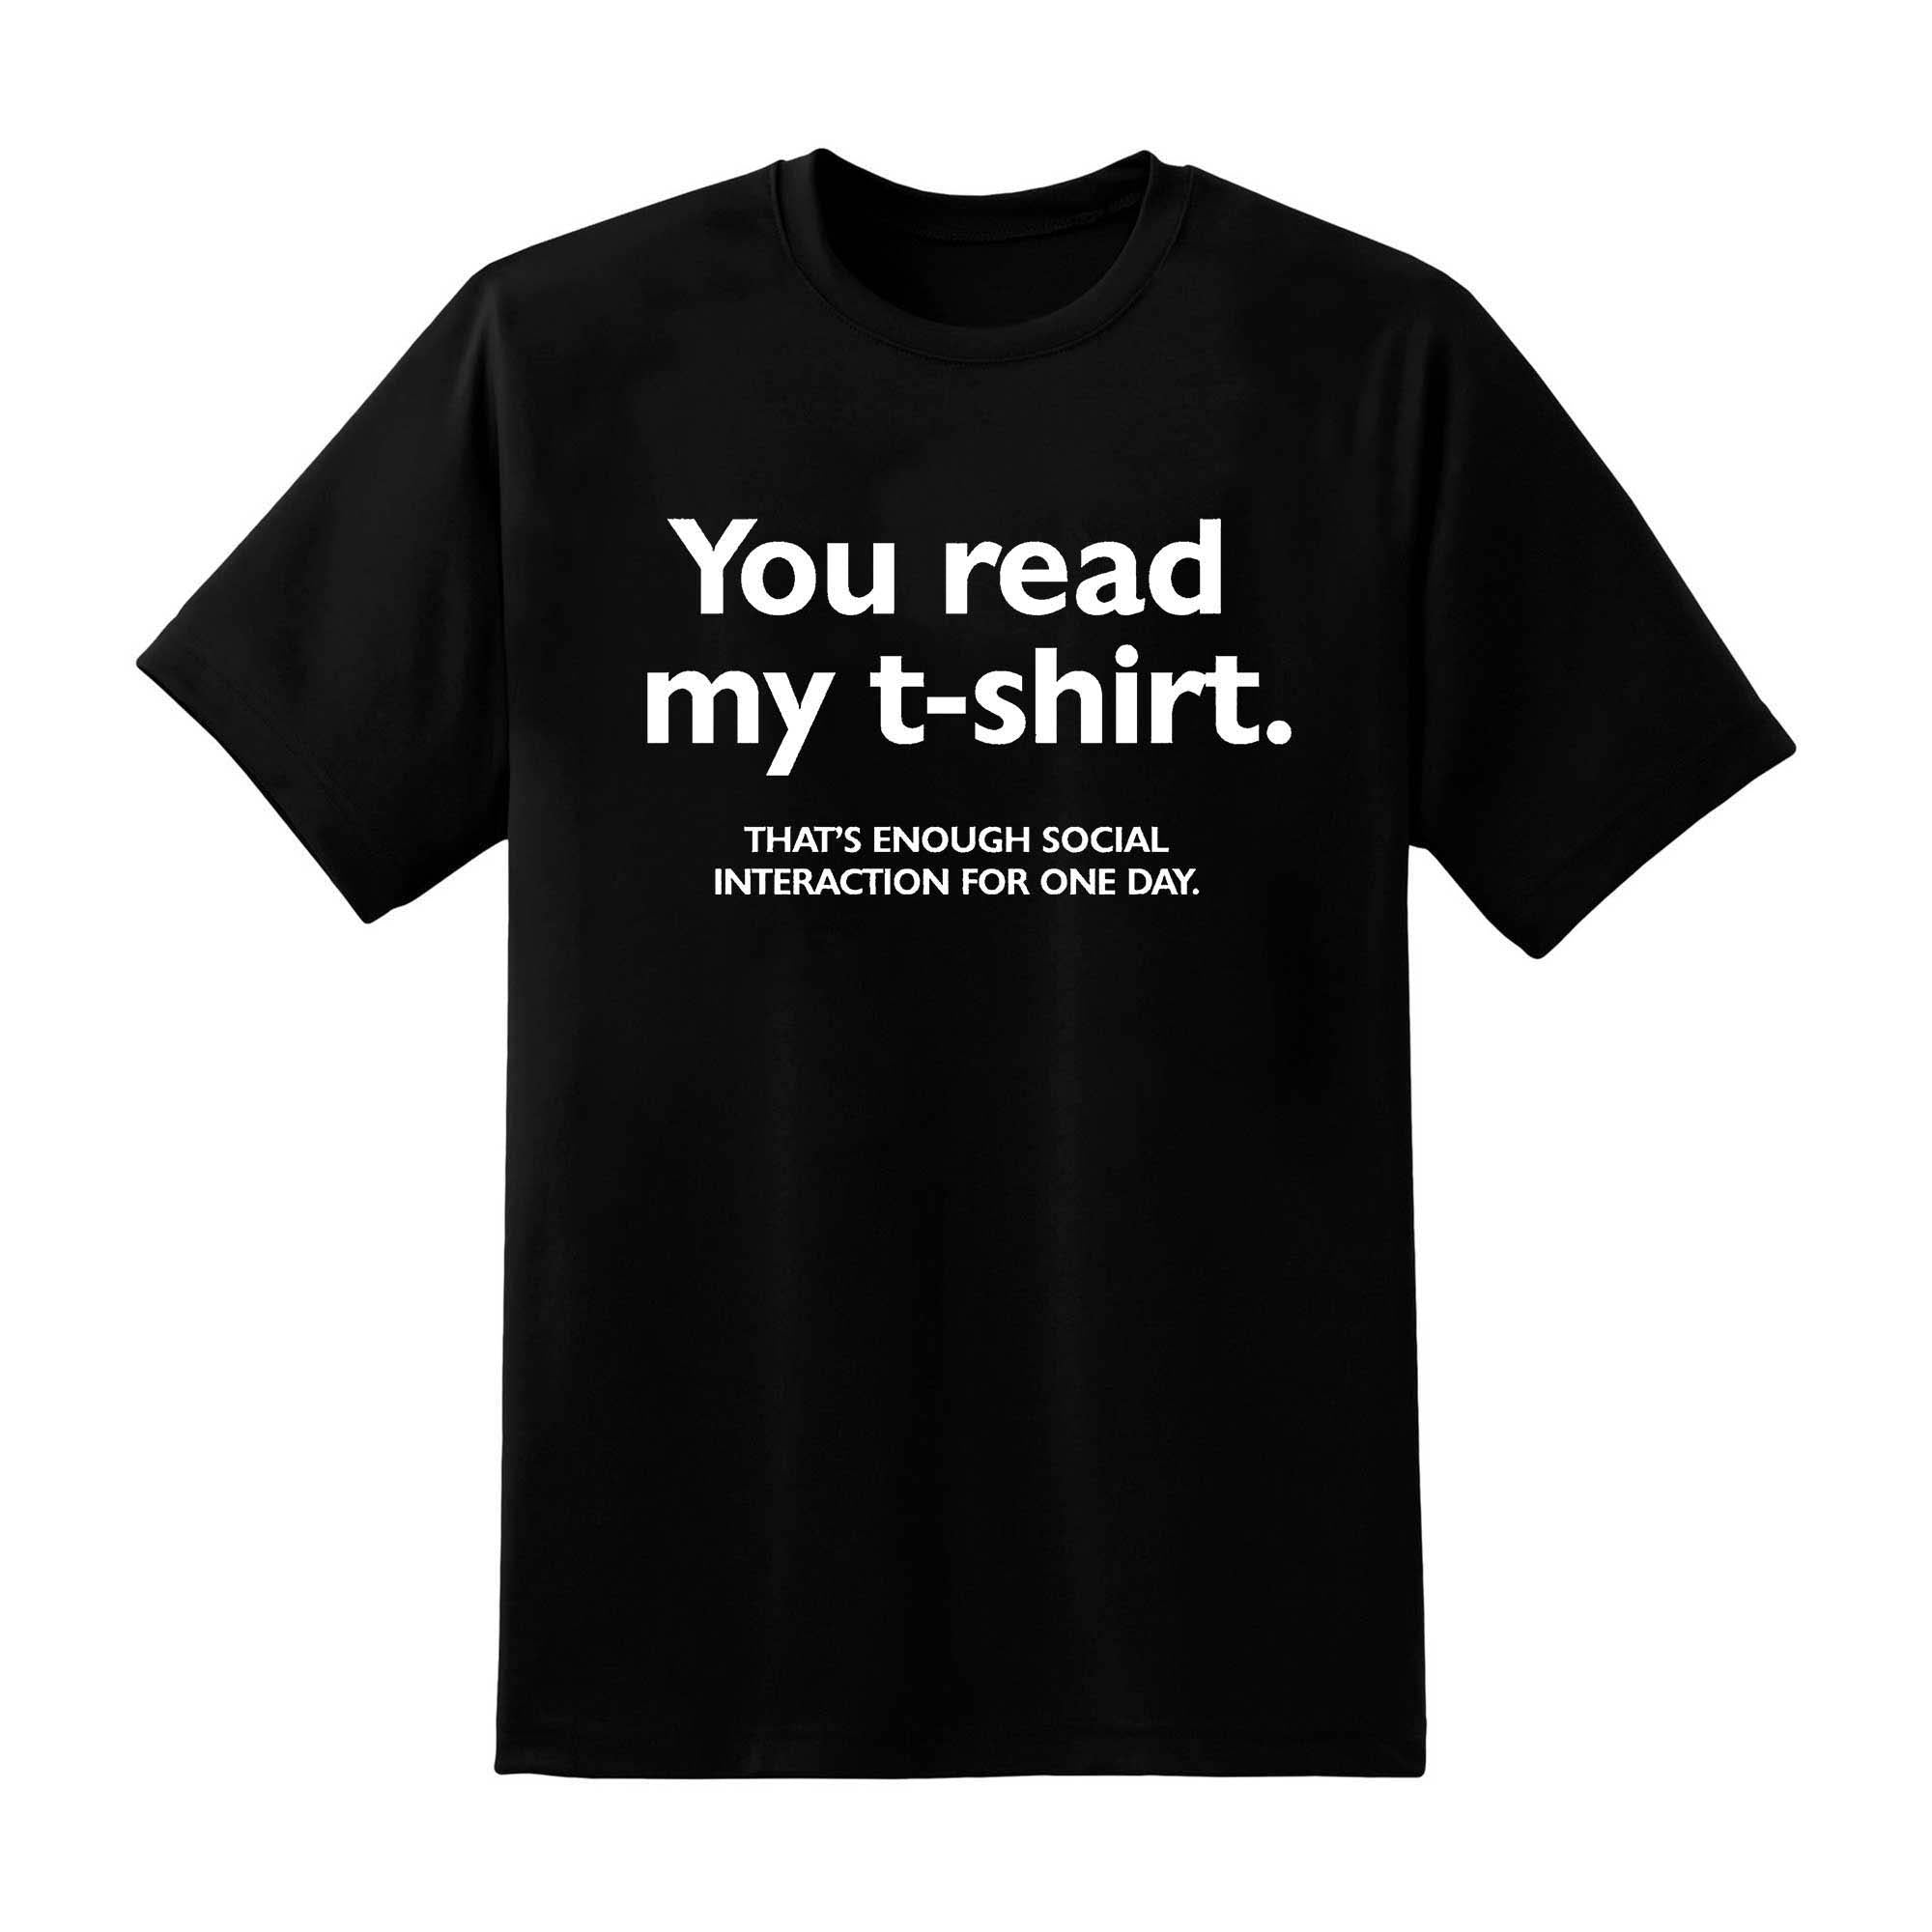 Skitongift Skitongift You Read My T Shirt Thats Enough Social Interaction For One Day Essential T Shirt Funny Shirts